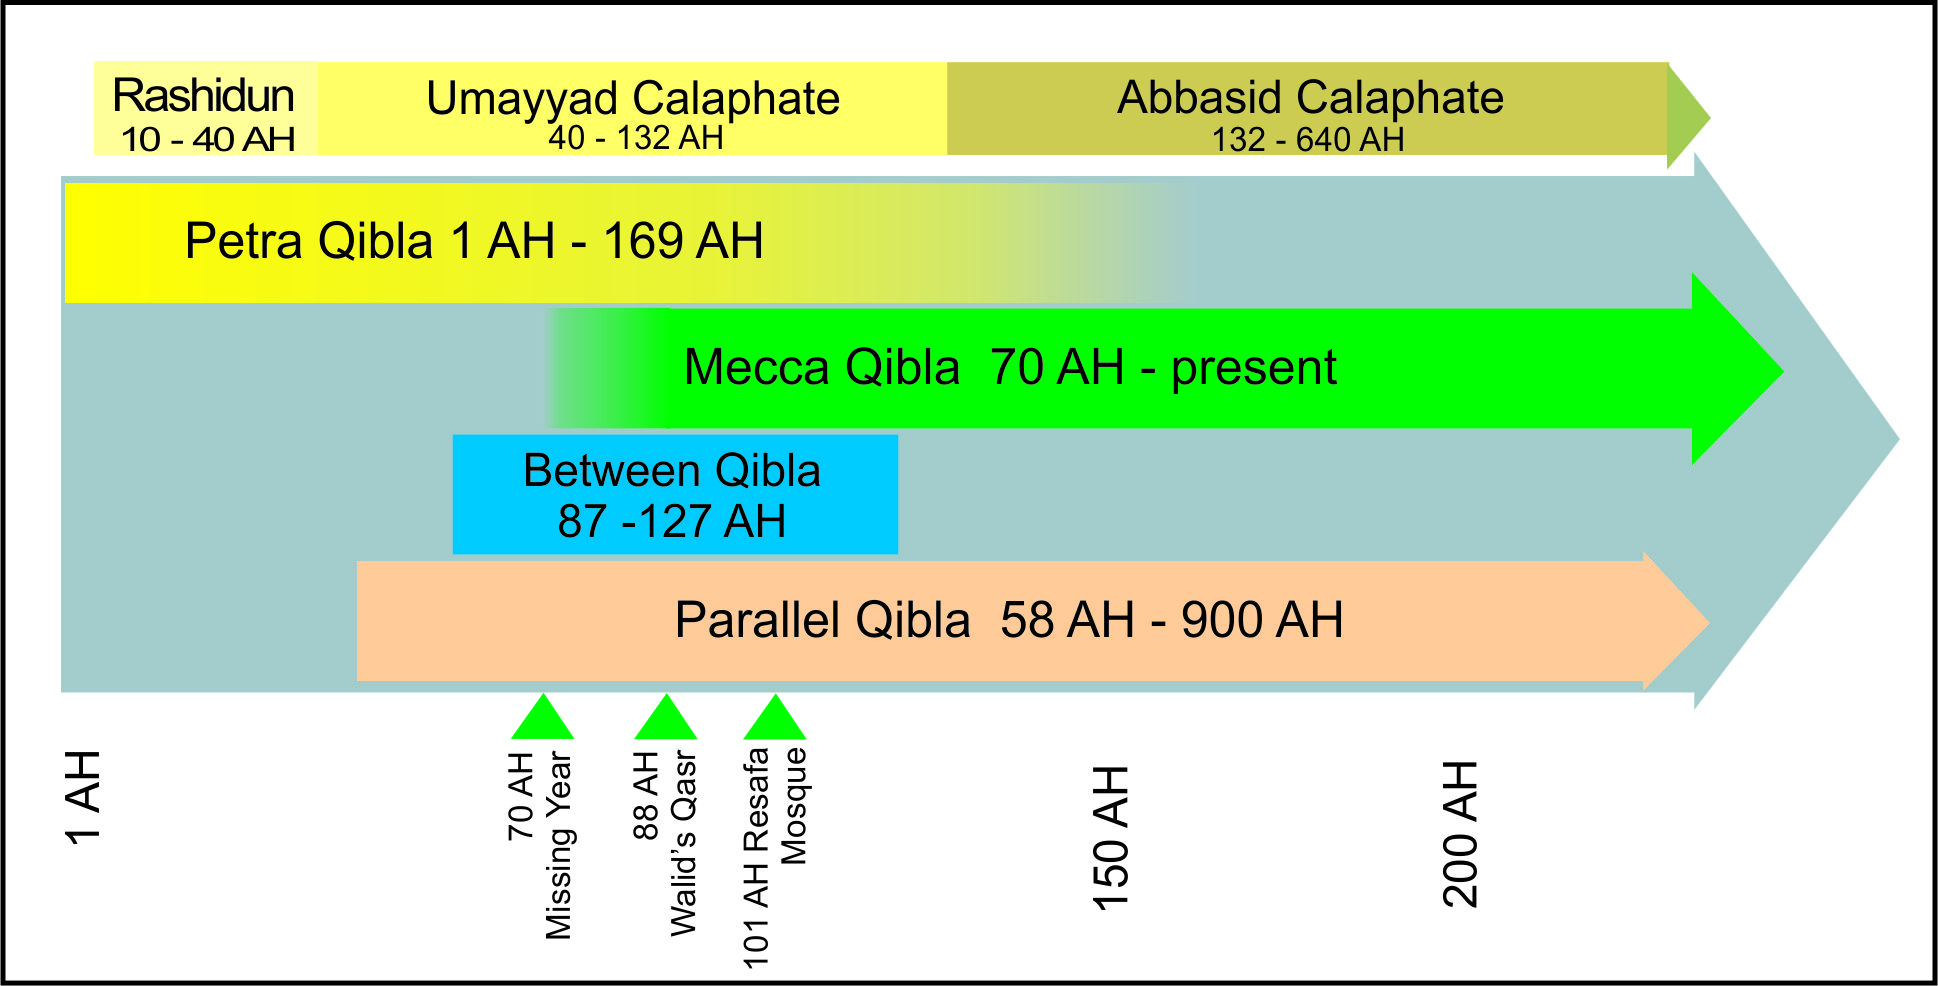 Above is a timeline of new mosque construction from the beginning of the Islamic calendar through 200 years.